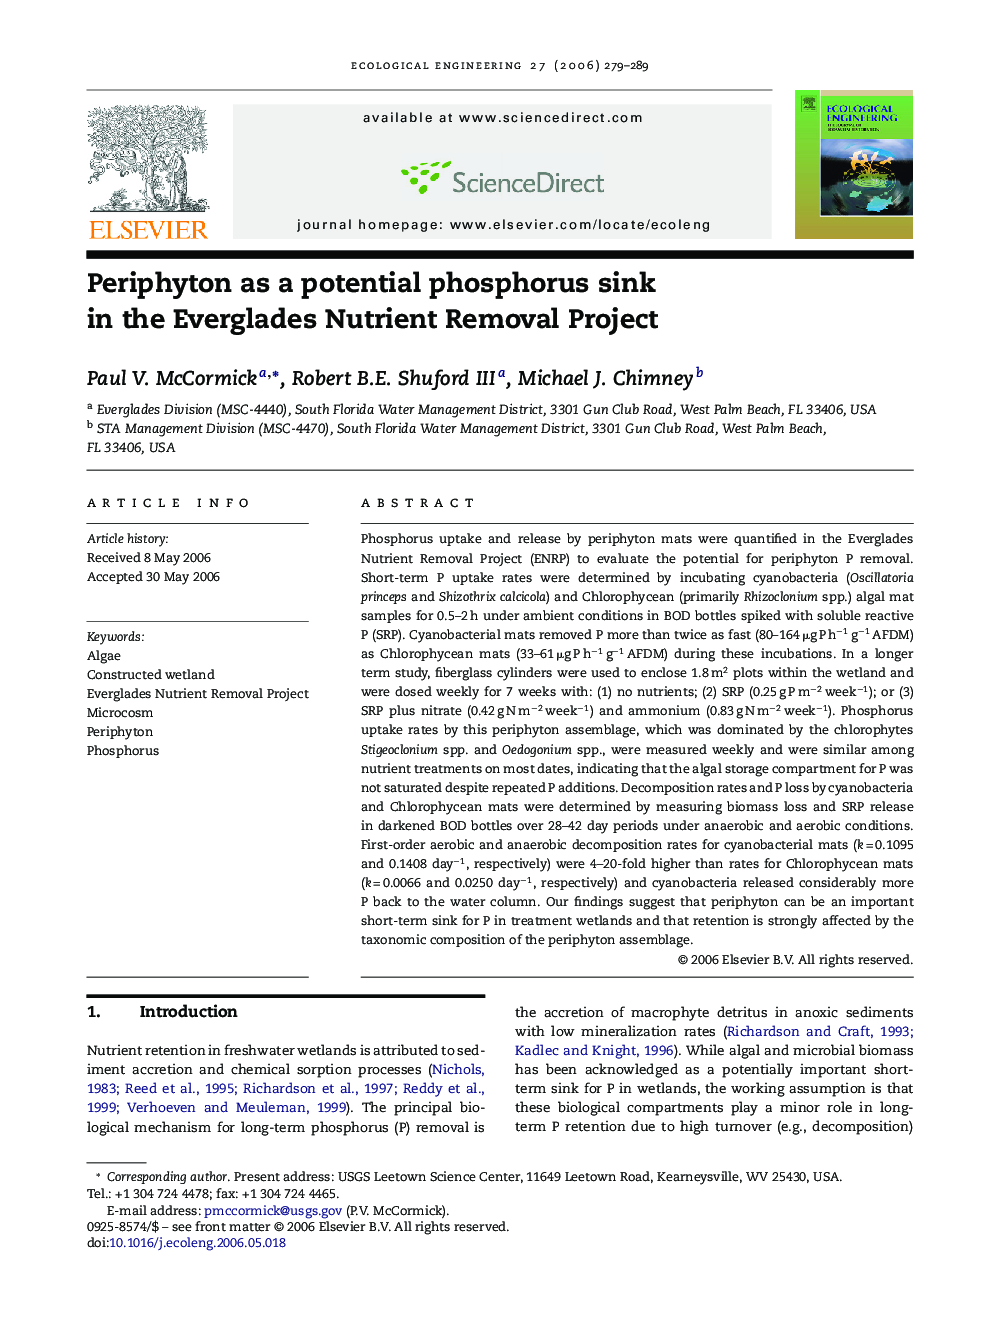 Periphyton as a potential phosphorus sink in the Everglades Nutrient Removal Project